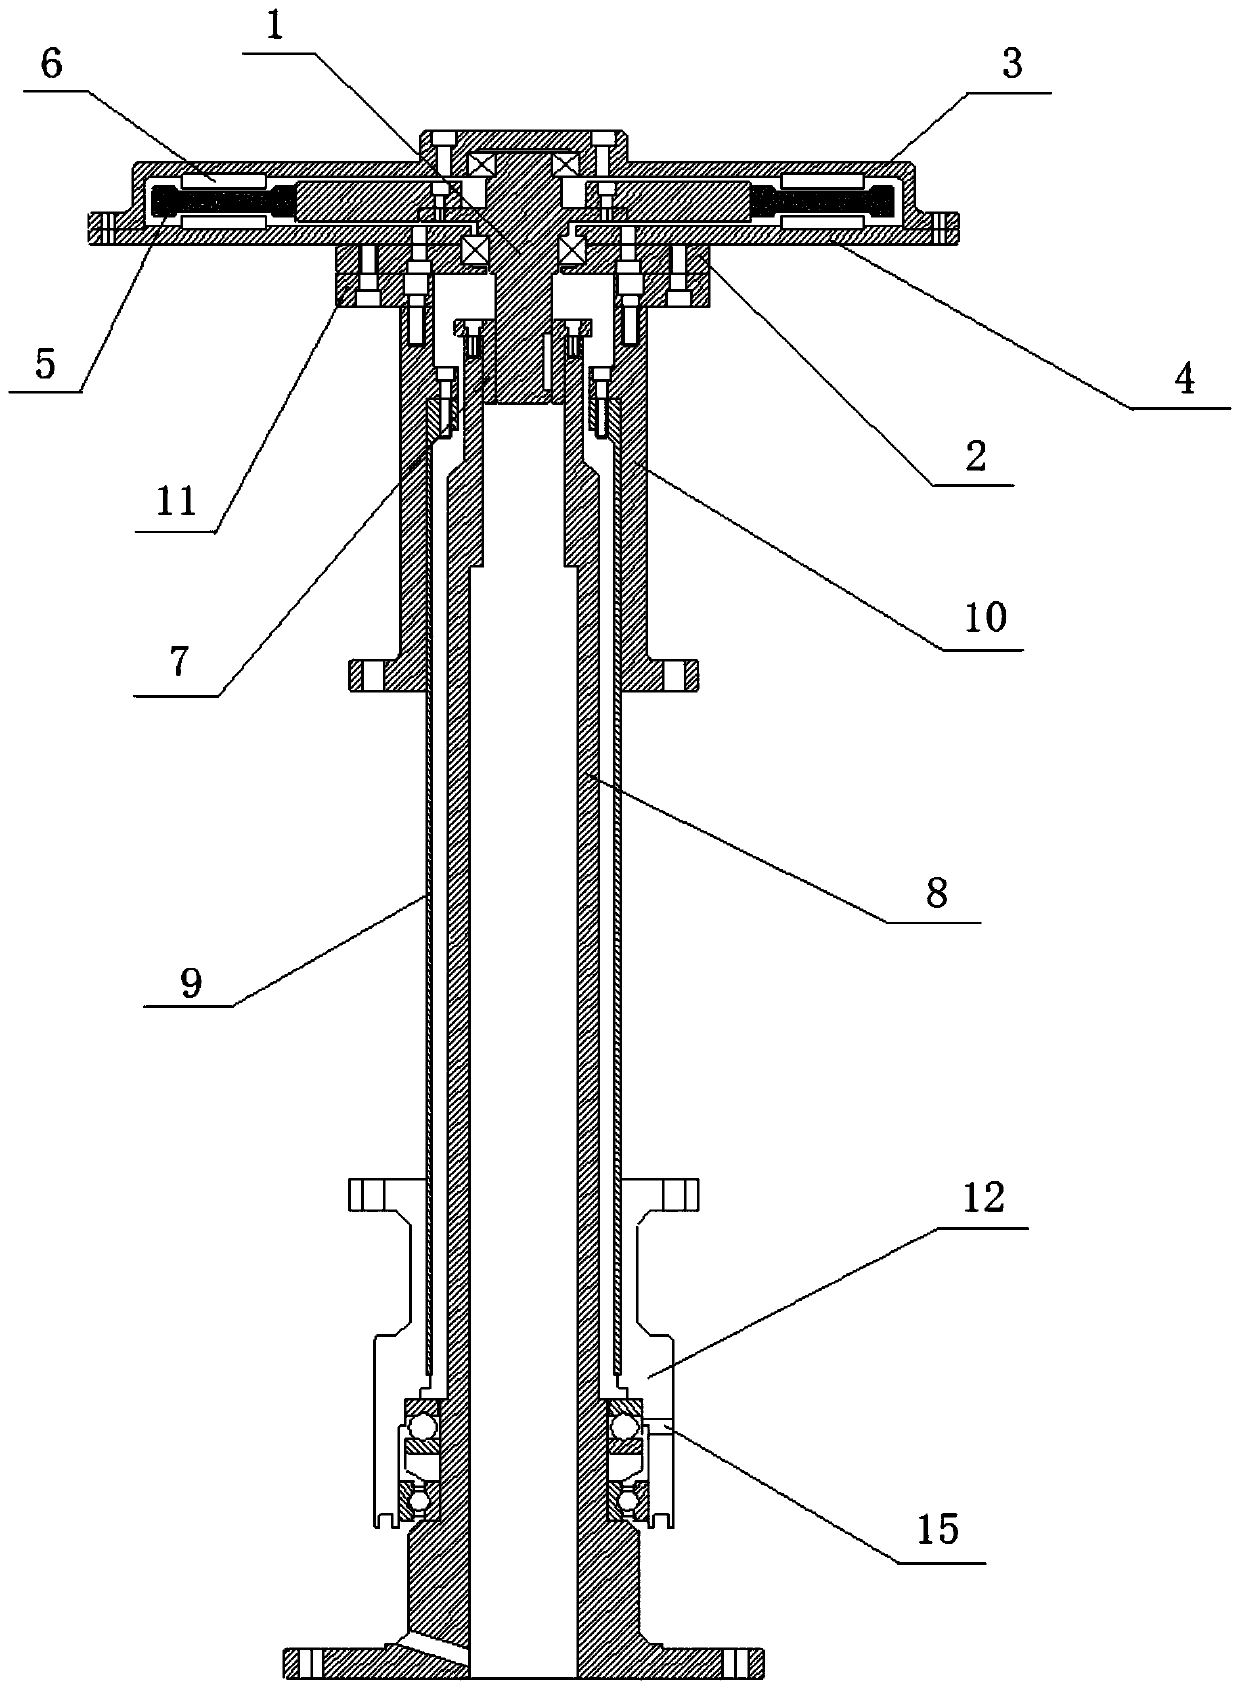 Novel vertical-axis wind driven generator and assembly method thereof